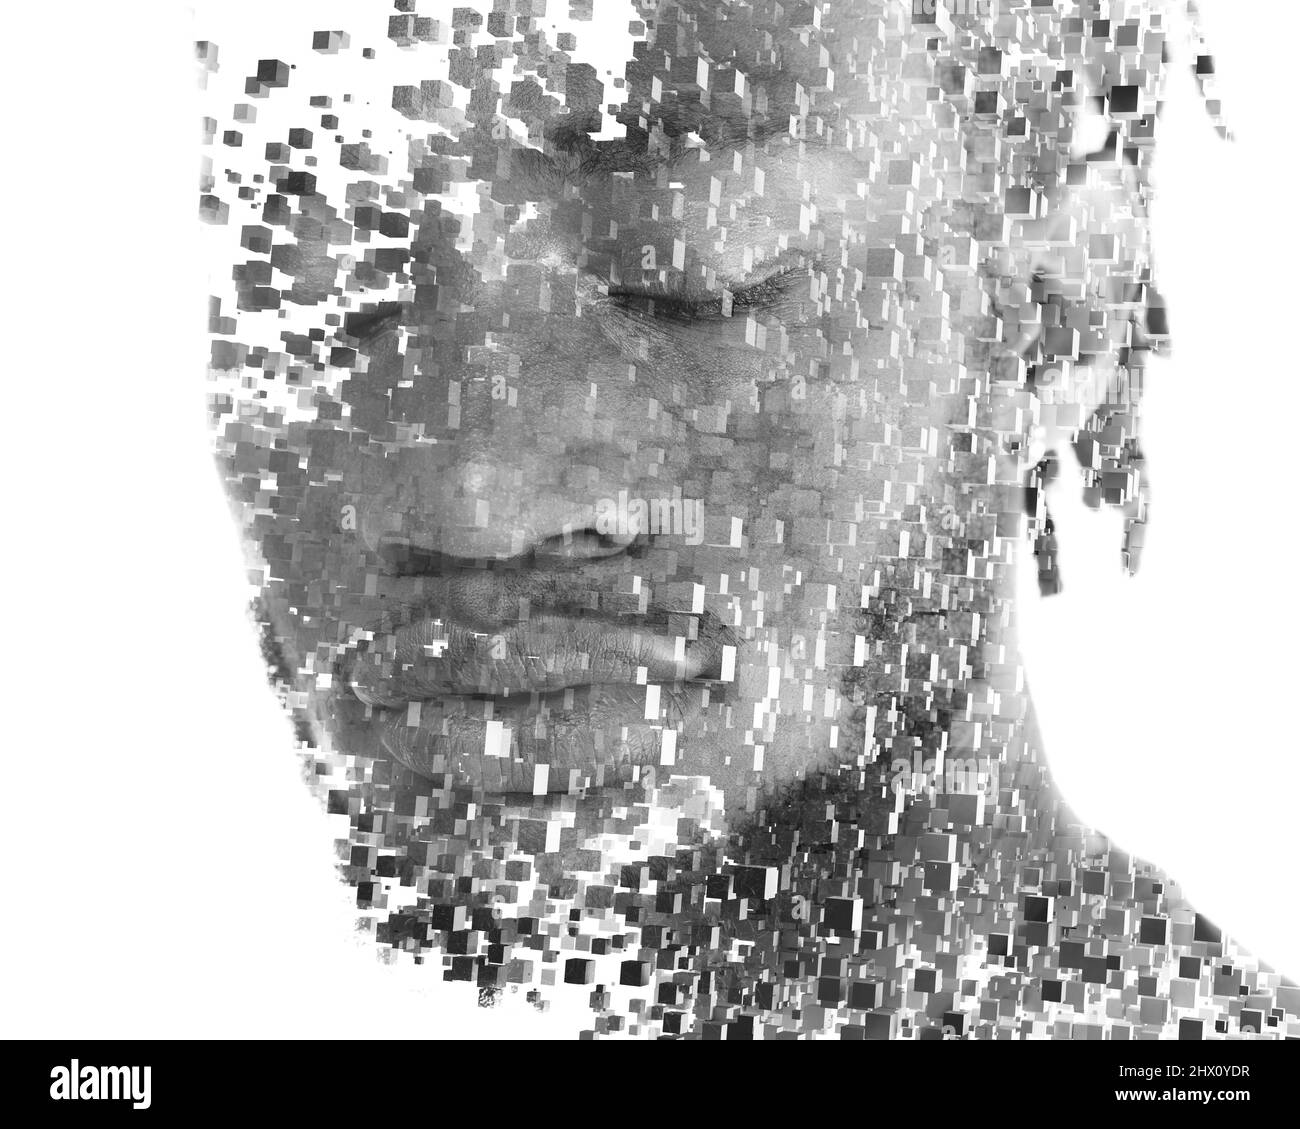 Dramatic portrait of a young black man combined with computer graphics Stock Photo